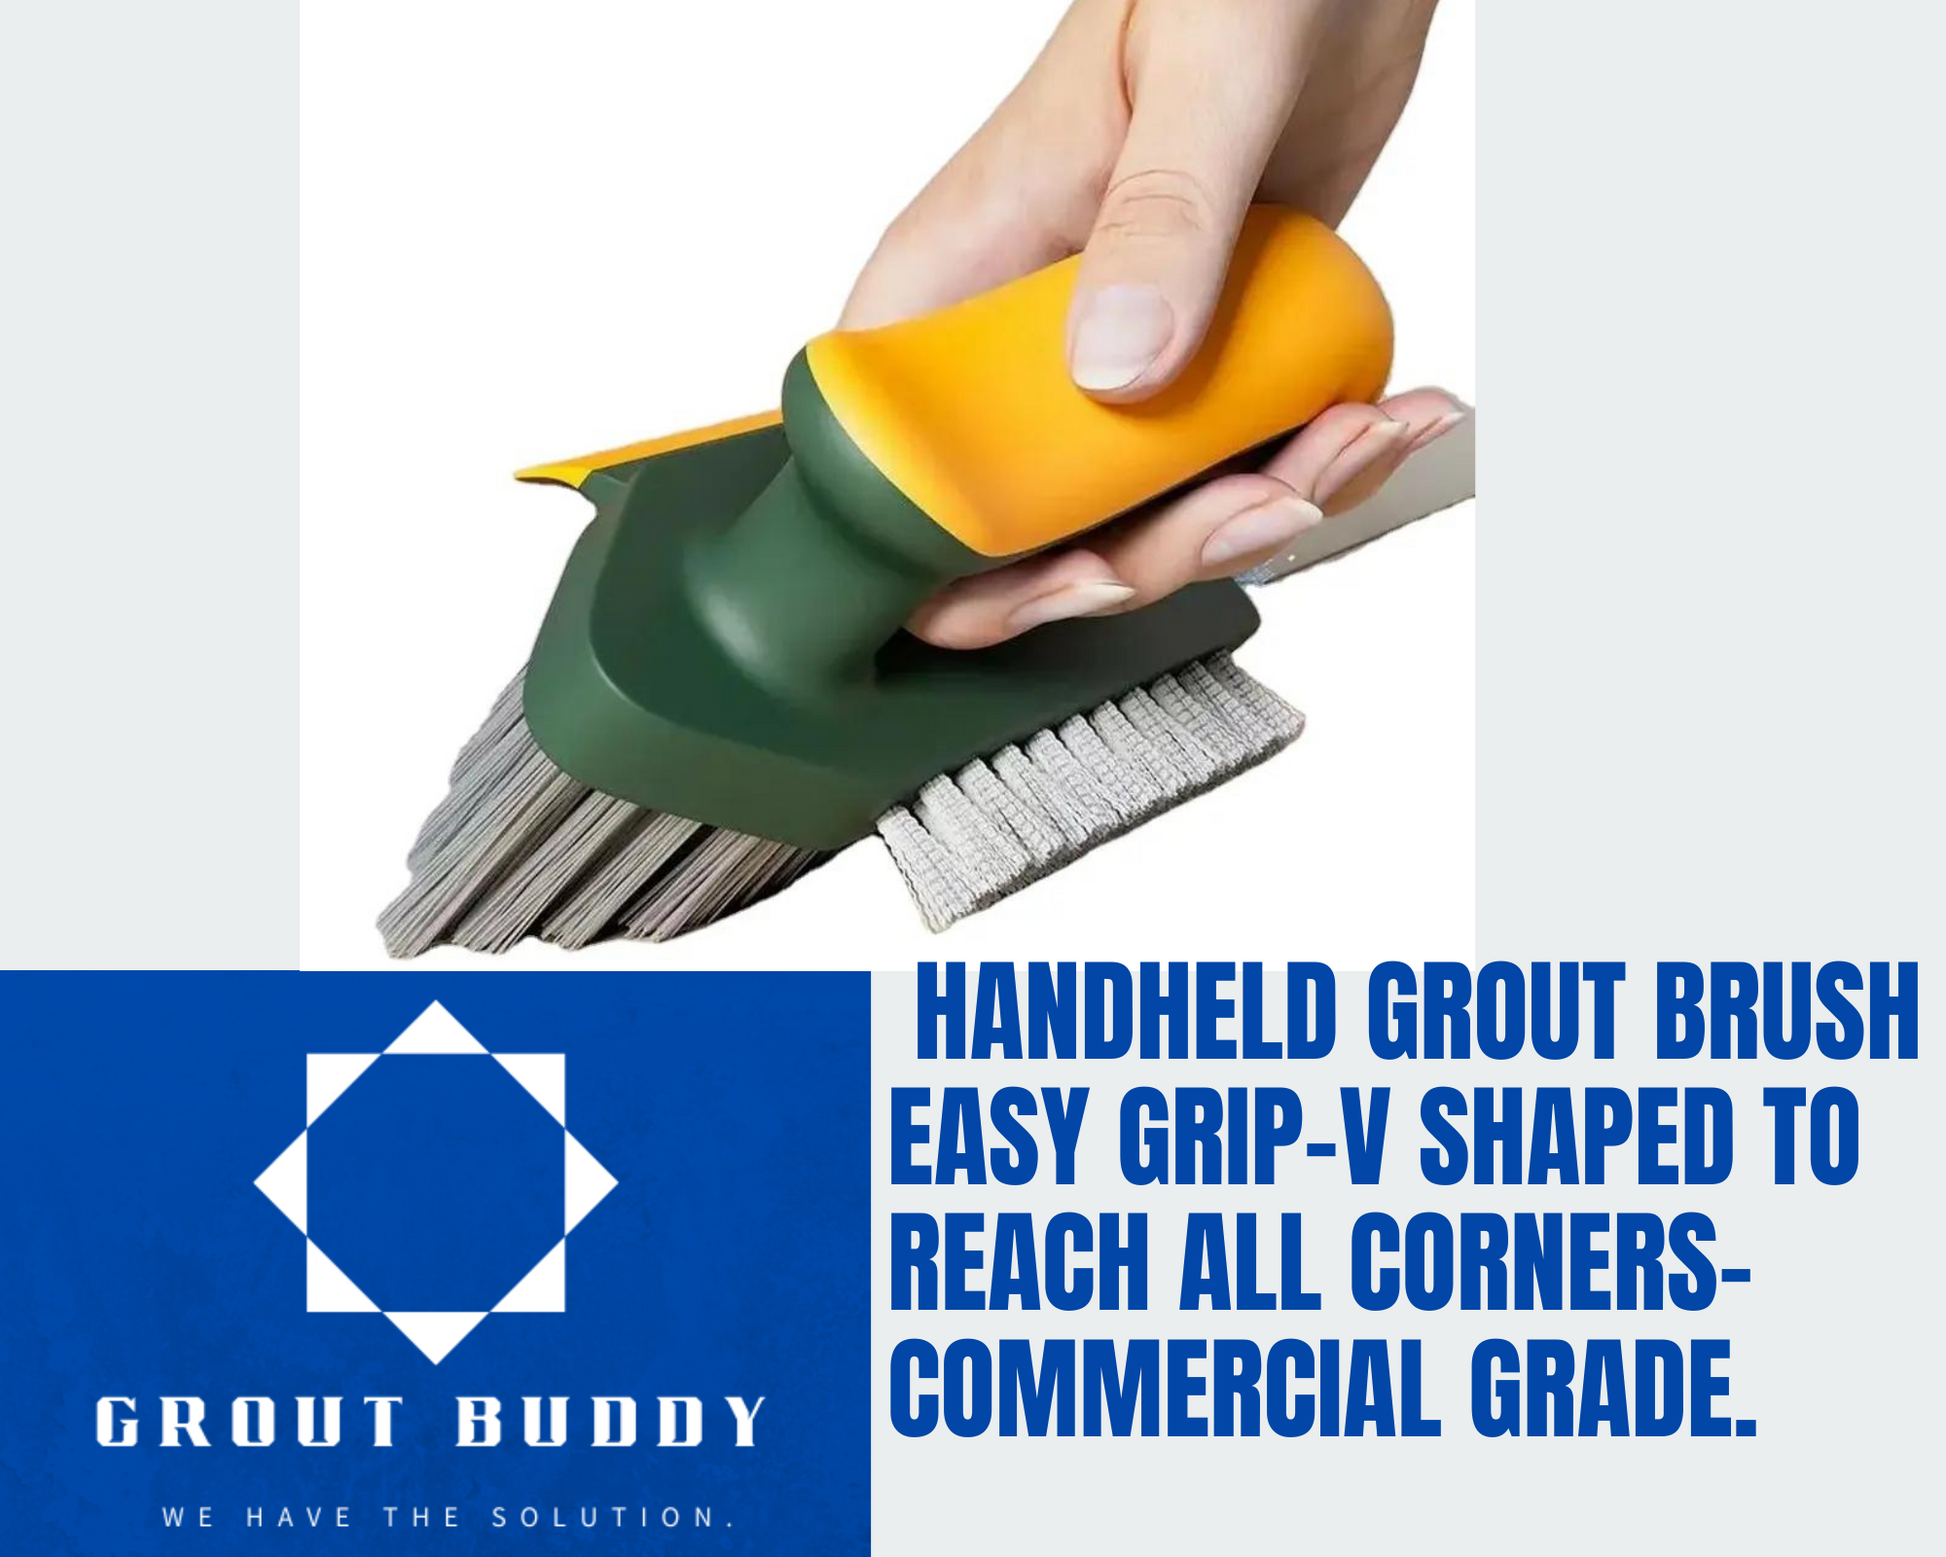 SHARK TILE & GROUT BRUSH - Clean Quest Products